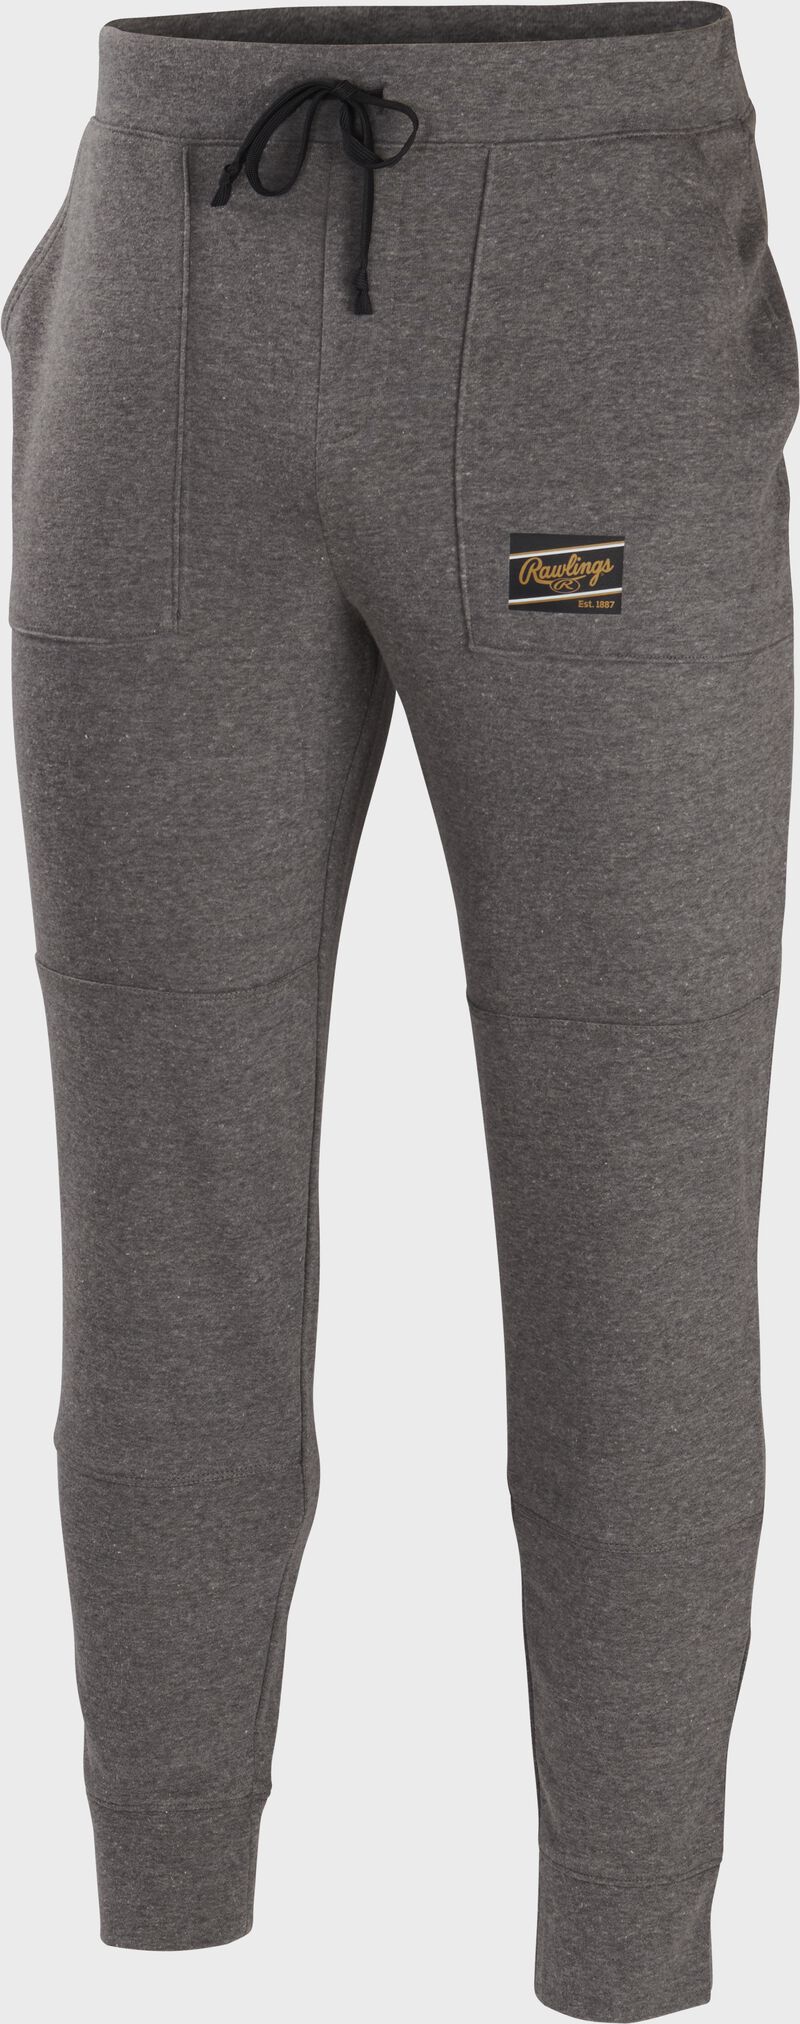 Rawlings Men's French Terry Joggers, Best Jogger Pants